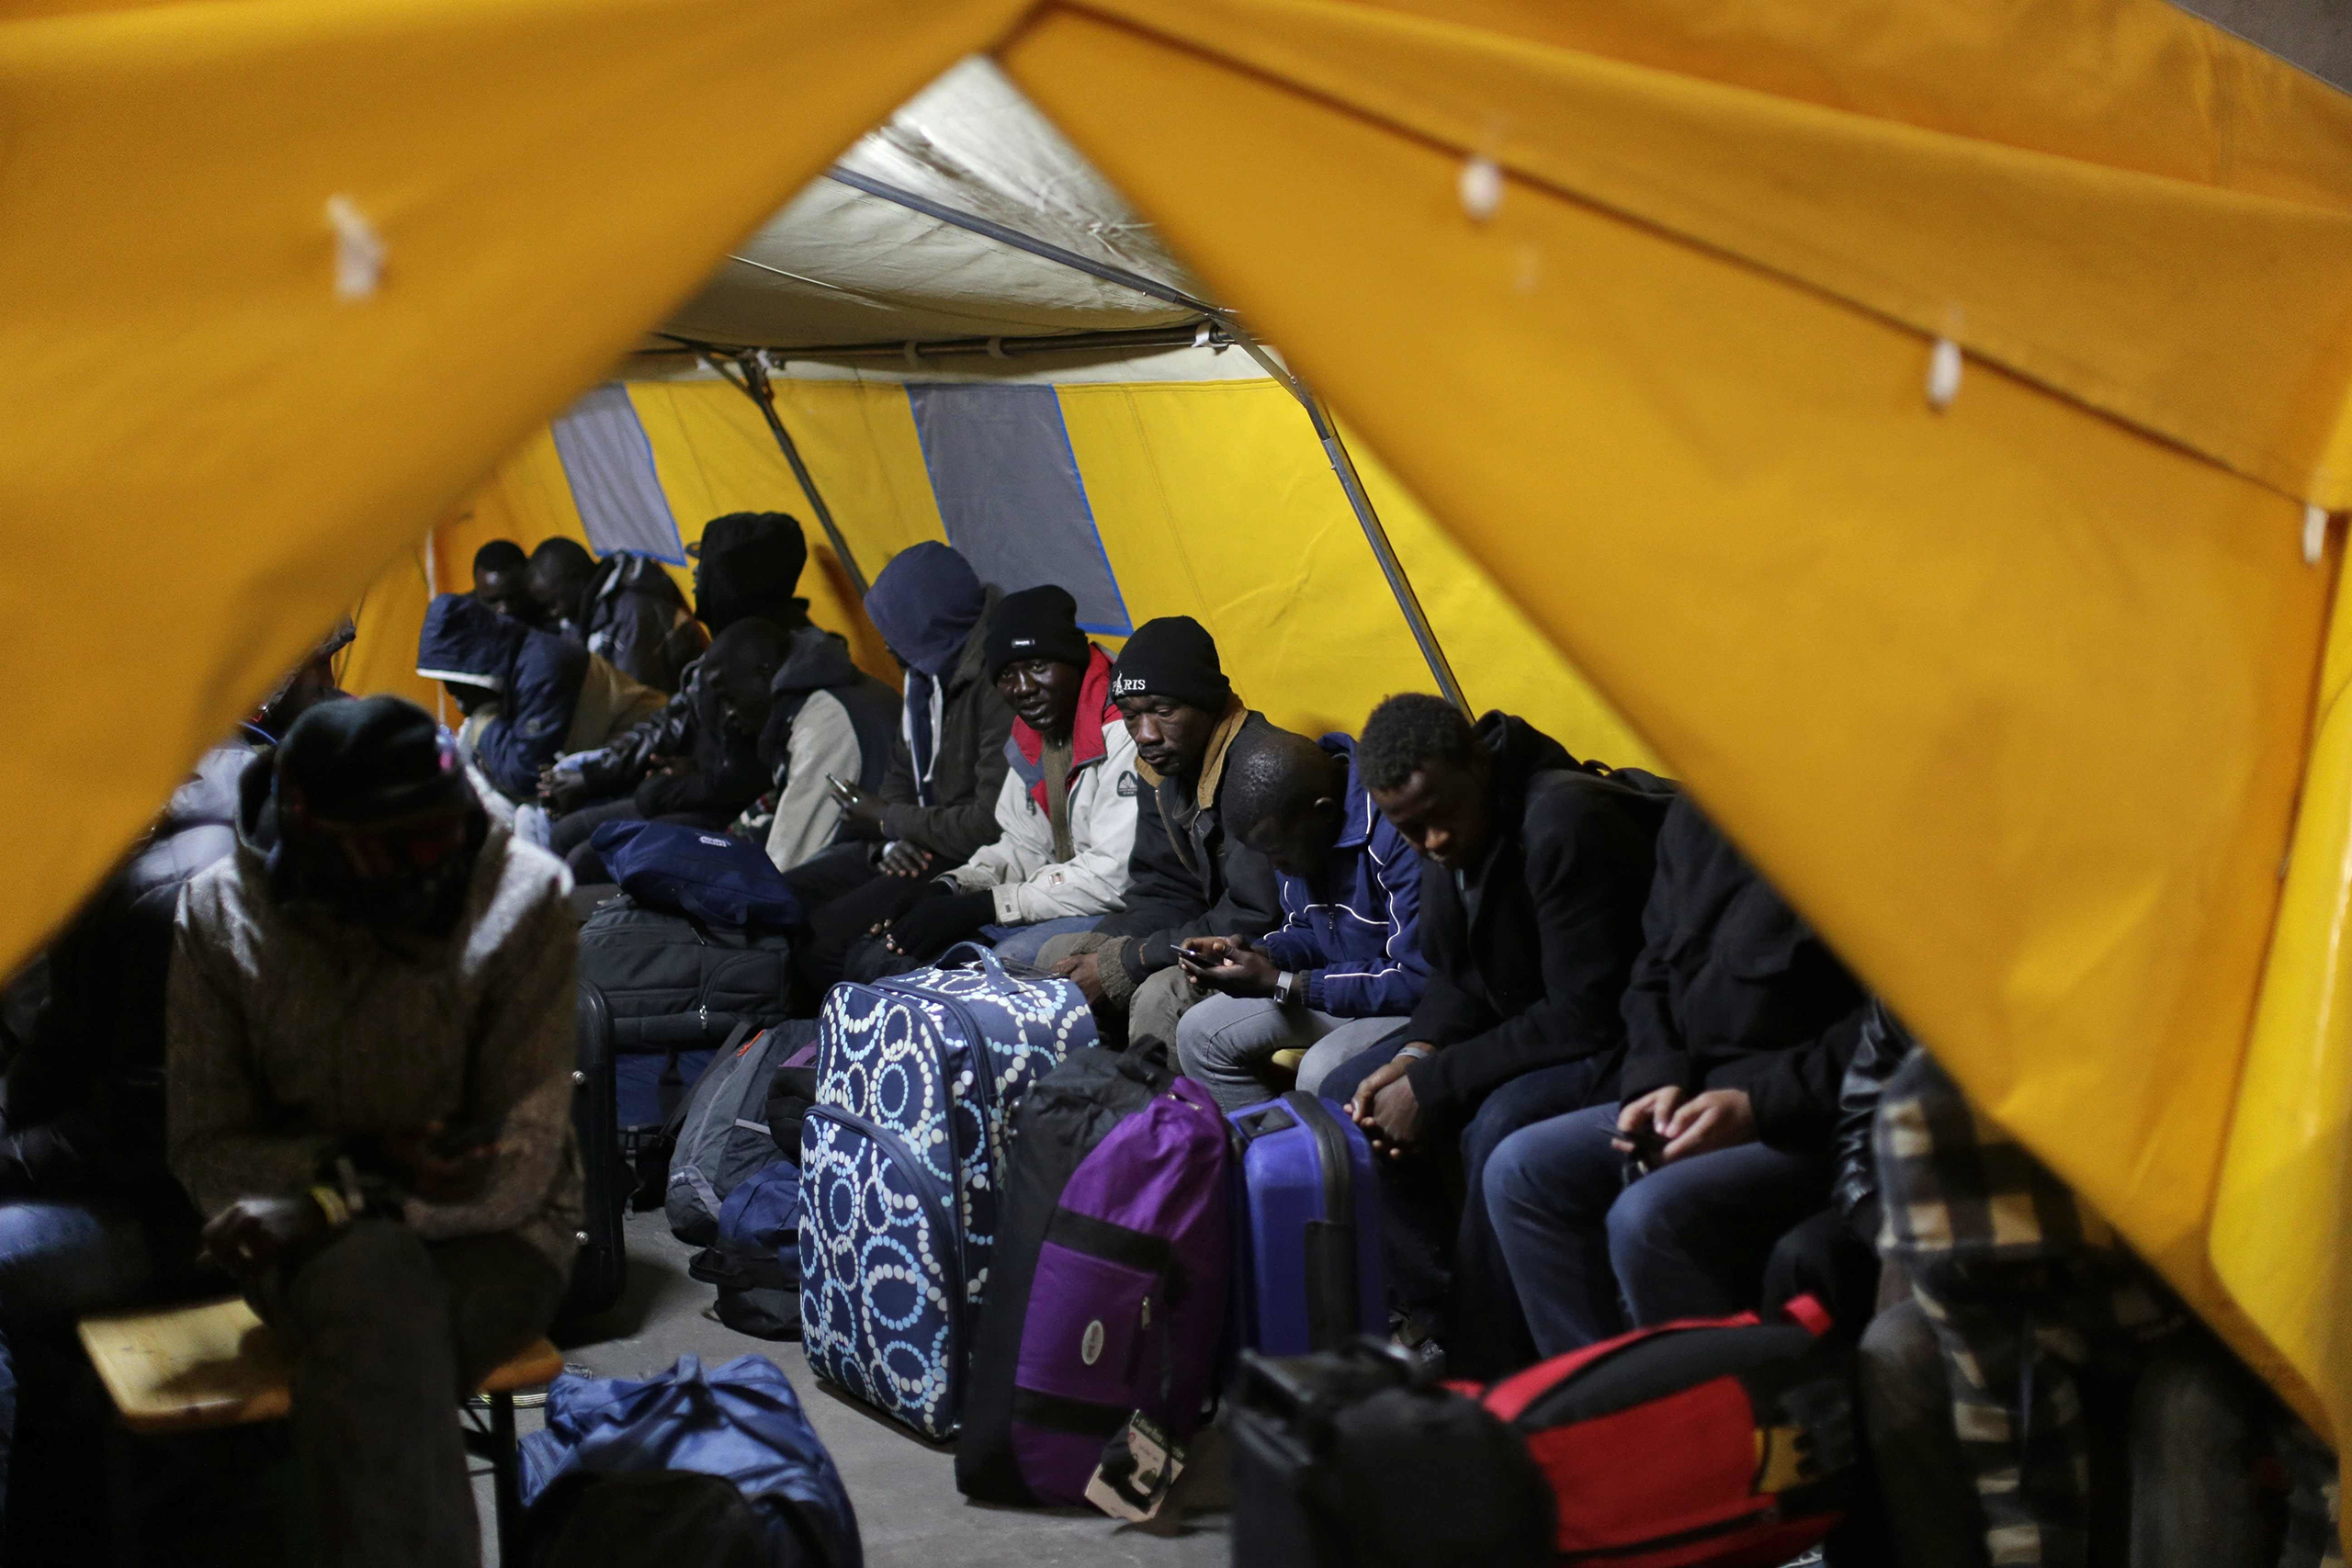 Migrants sit inside a tent as they are registered at a processing center in the makeshift migrant camp known as  the Jungle,  near Calais, northern France, on Oct. 24, 2016.